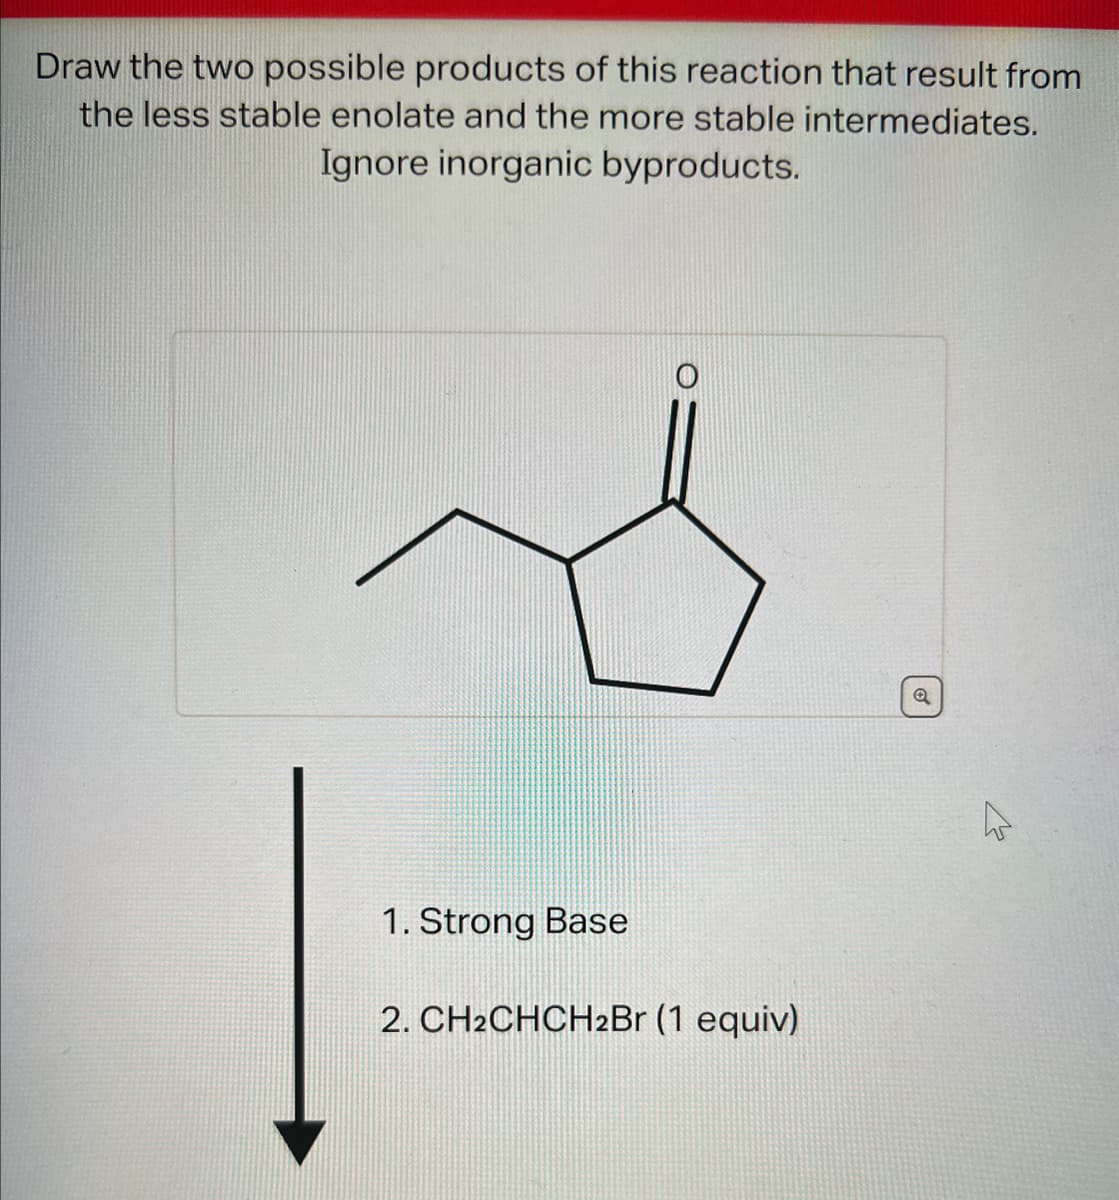 Draw the two possible products of this reaction that result from
the less stable enolate and the more stable intermediates.
Ignore inorganic byproducts.
1. Strong Base
2. CH2CHCH2Br (1 equiv)
Q
27